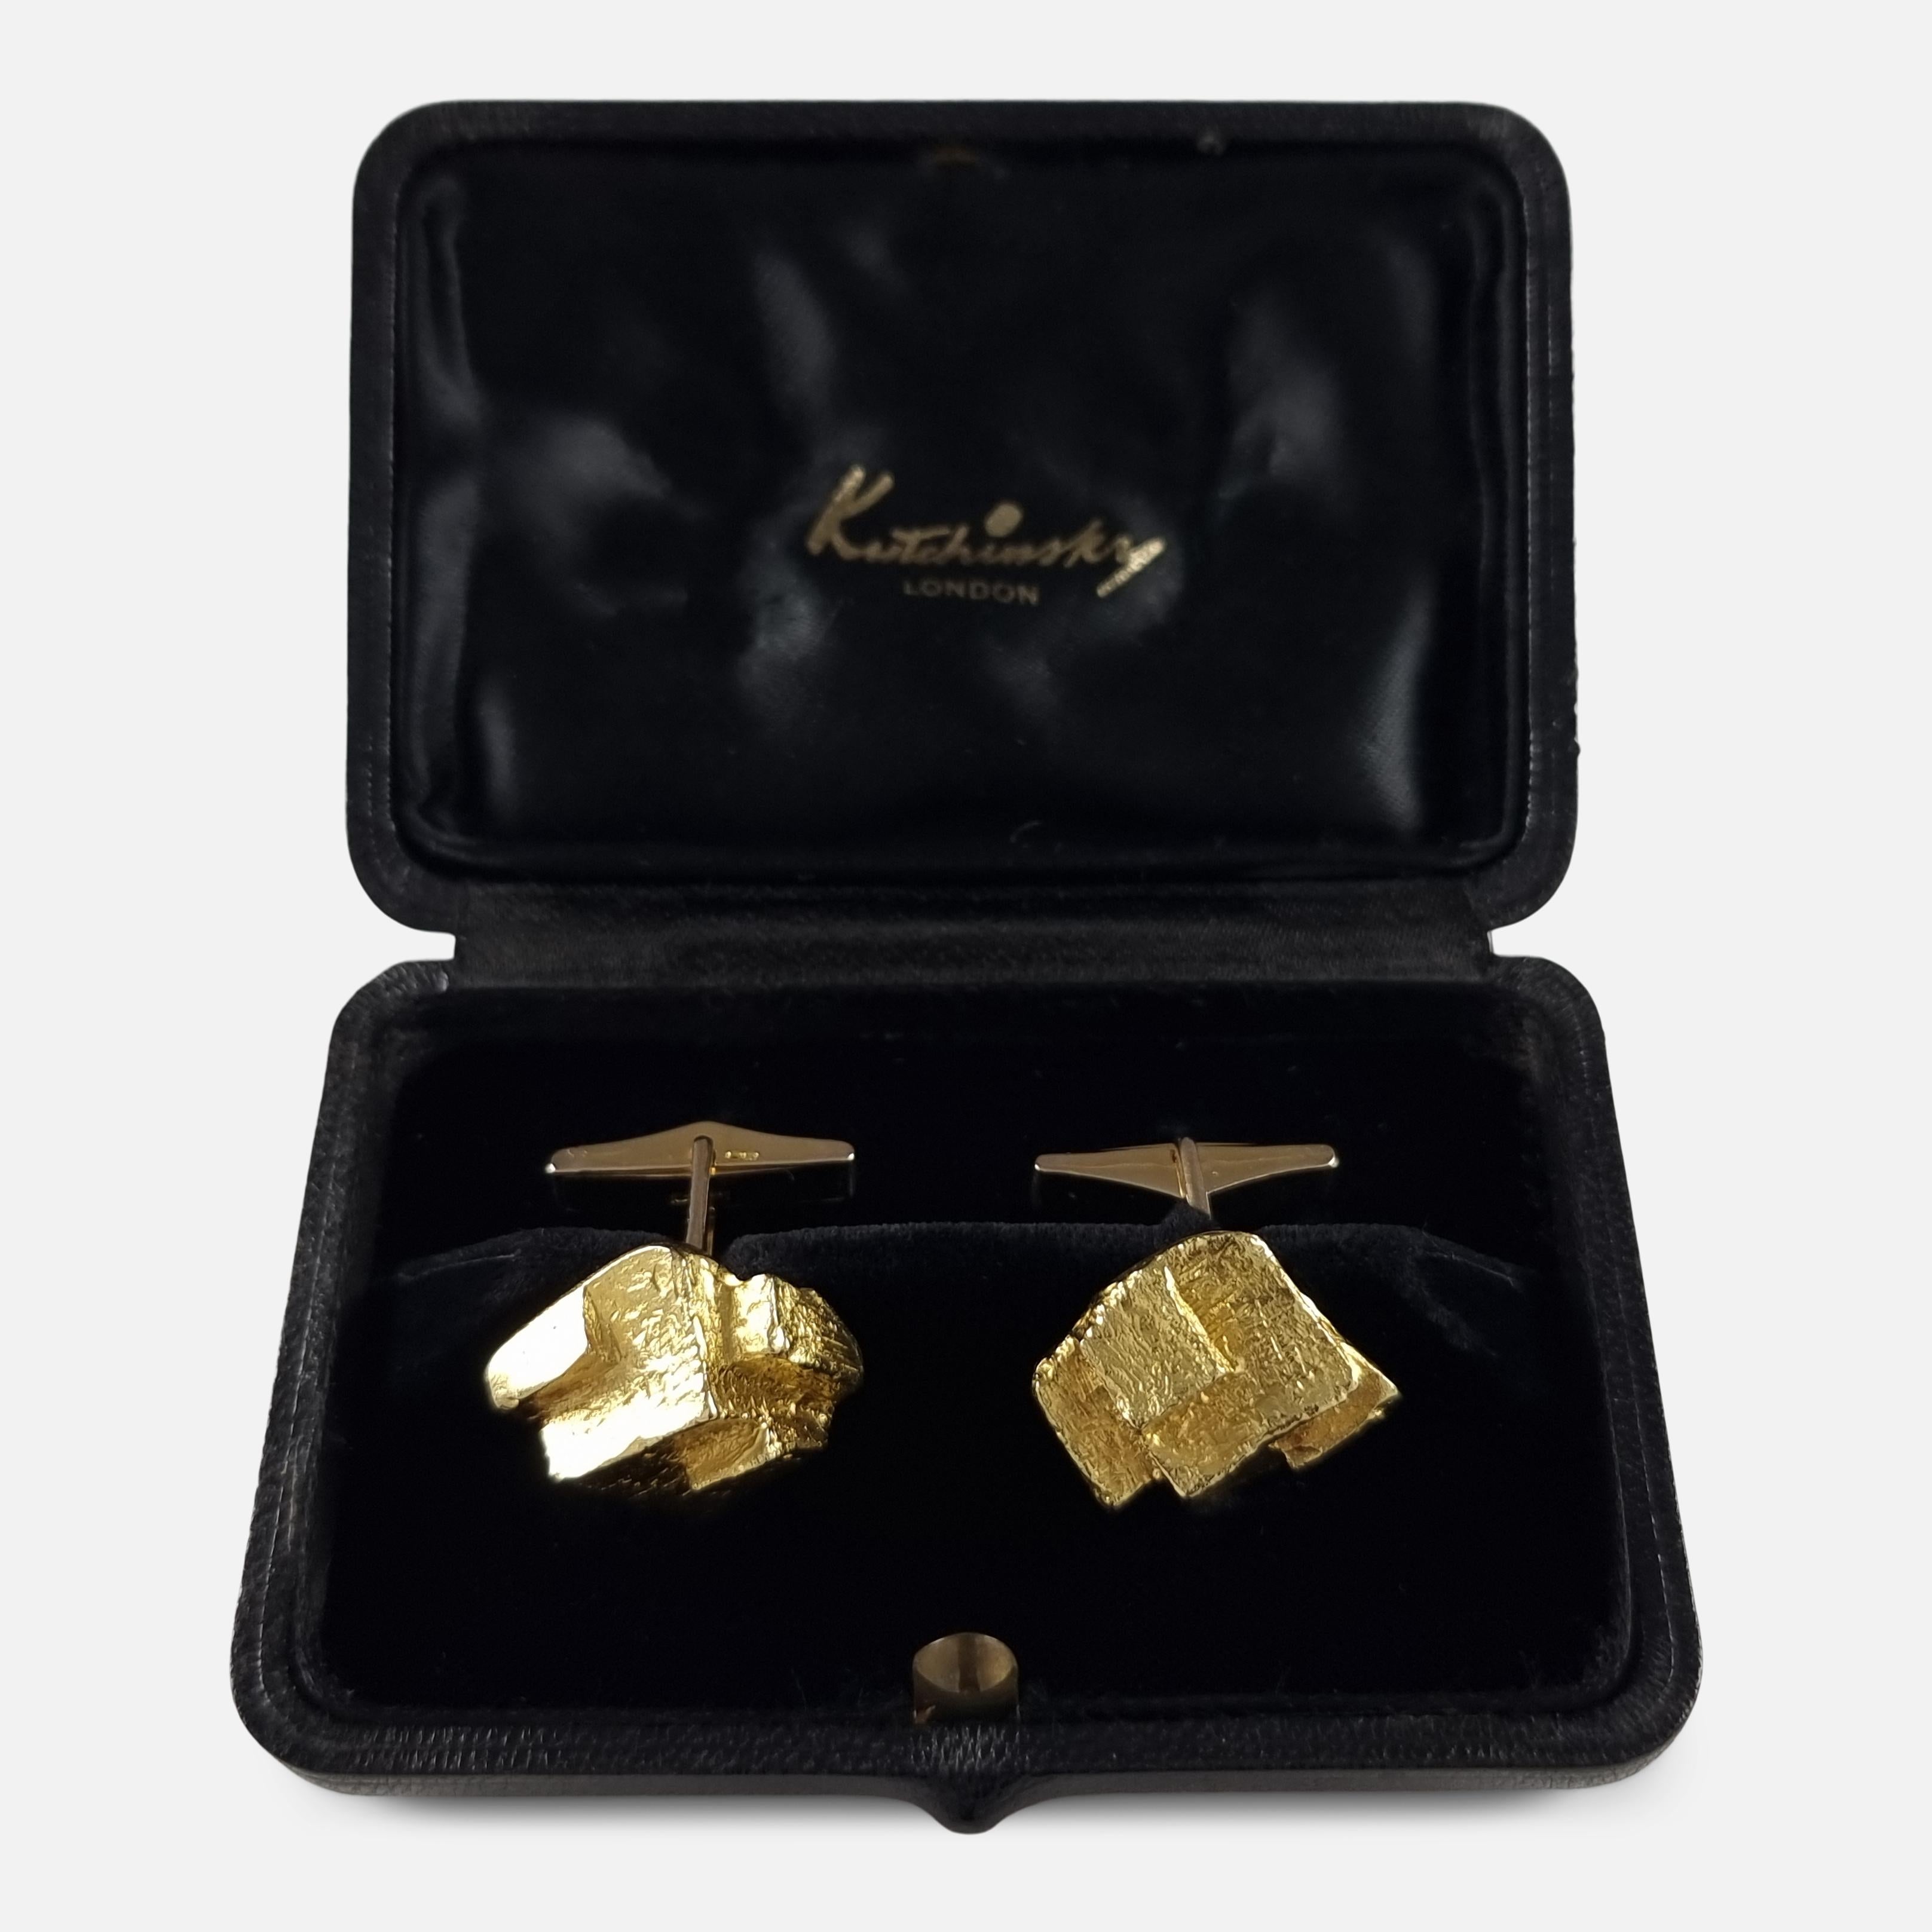 A set of 18ct yellow gold cufflinks by Kutchinsky. The cufflinks are single-sided, with a textured cuboid form, and signed Kutchinsky.

The cufflinks are hallmarked with the makers mark 'KLD', London hallmarks, and '18' to denote 18 carat gold.

The